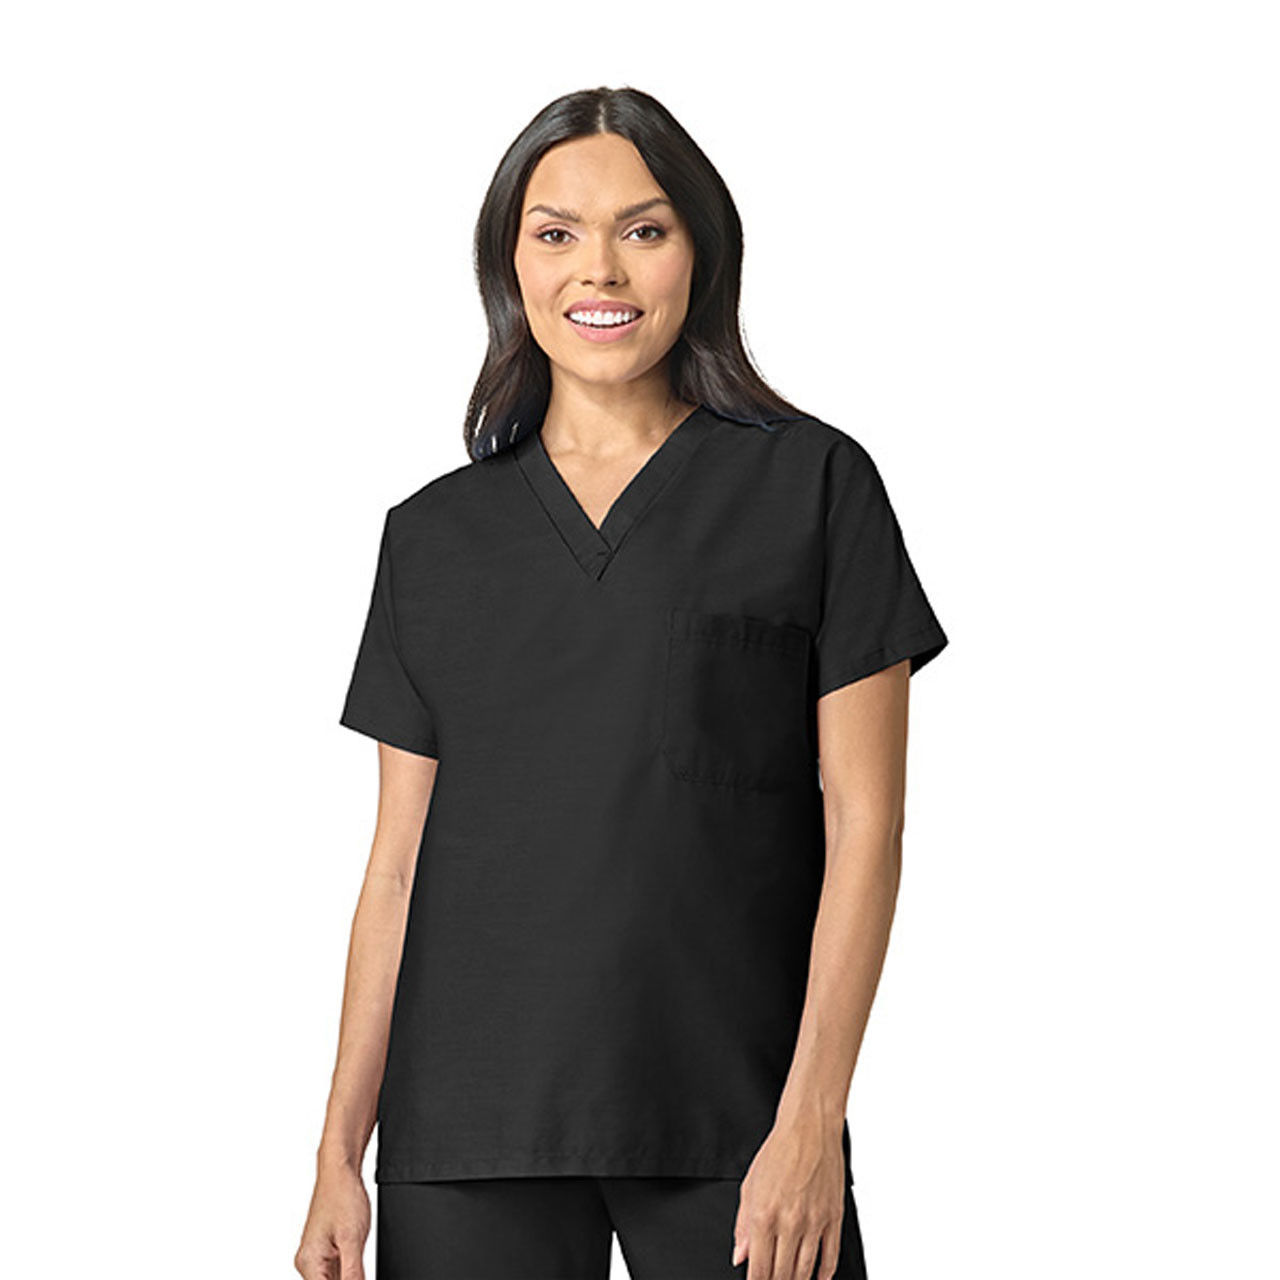 What color are the Black Scrub Tops?